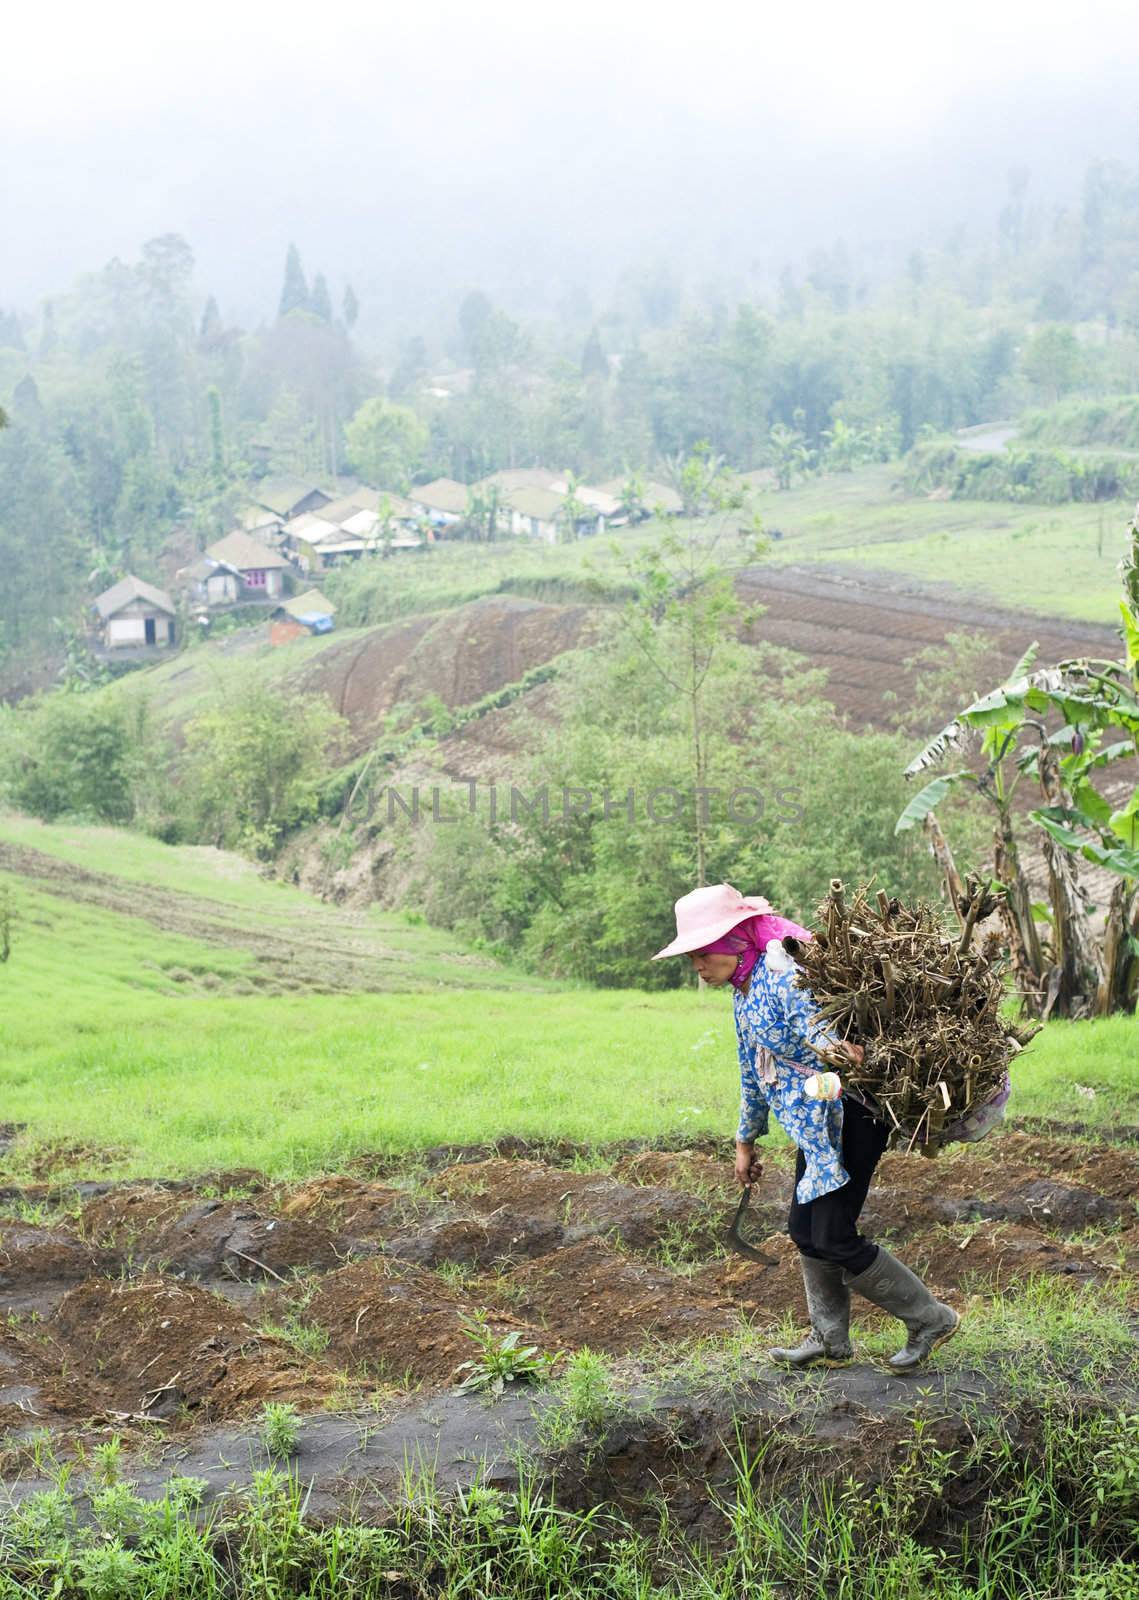 Sukapura, Indonesia - April 24, 2011: Indonesian woman carrying firewood on the way to her home